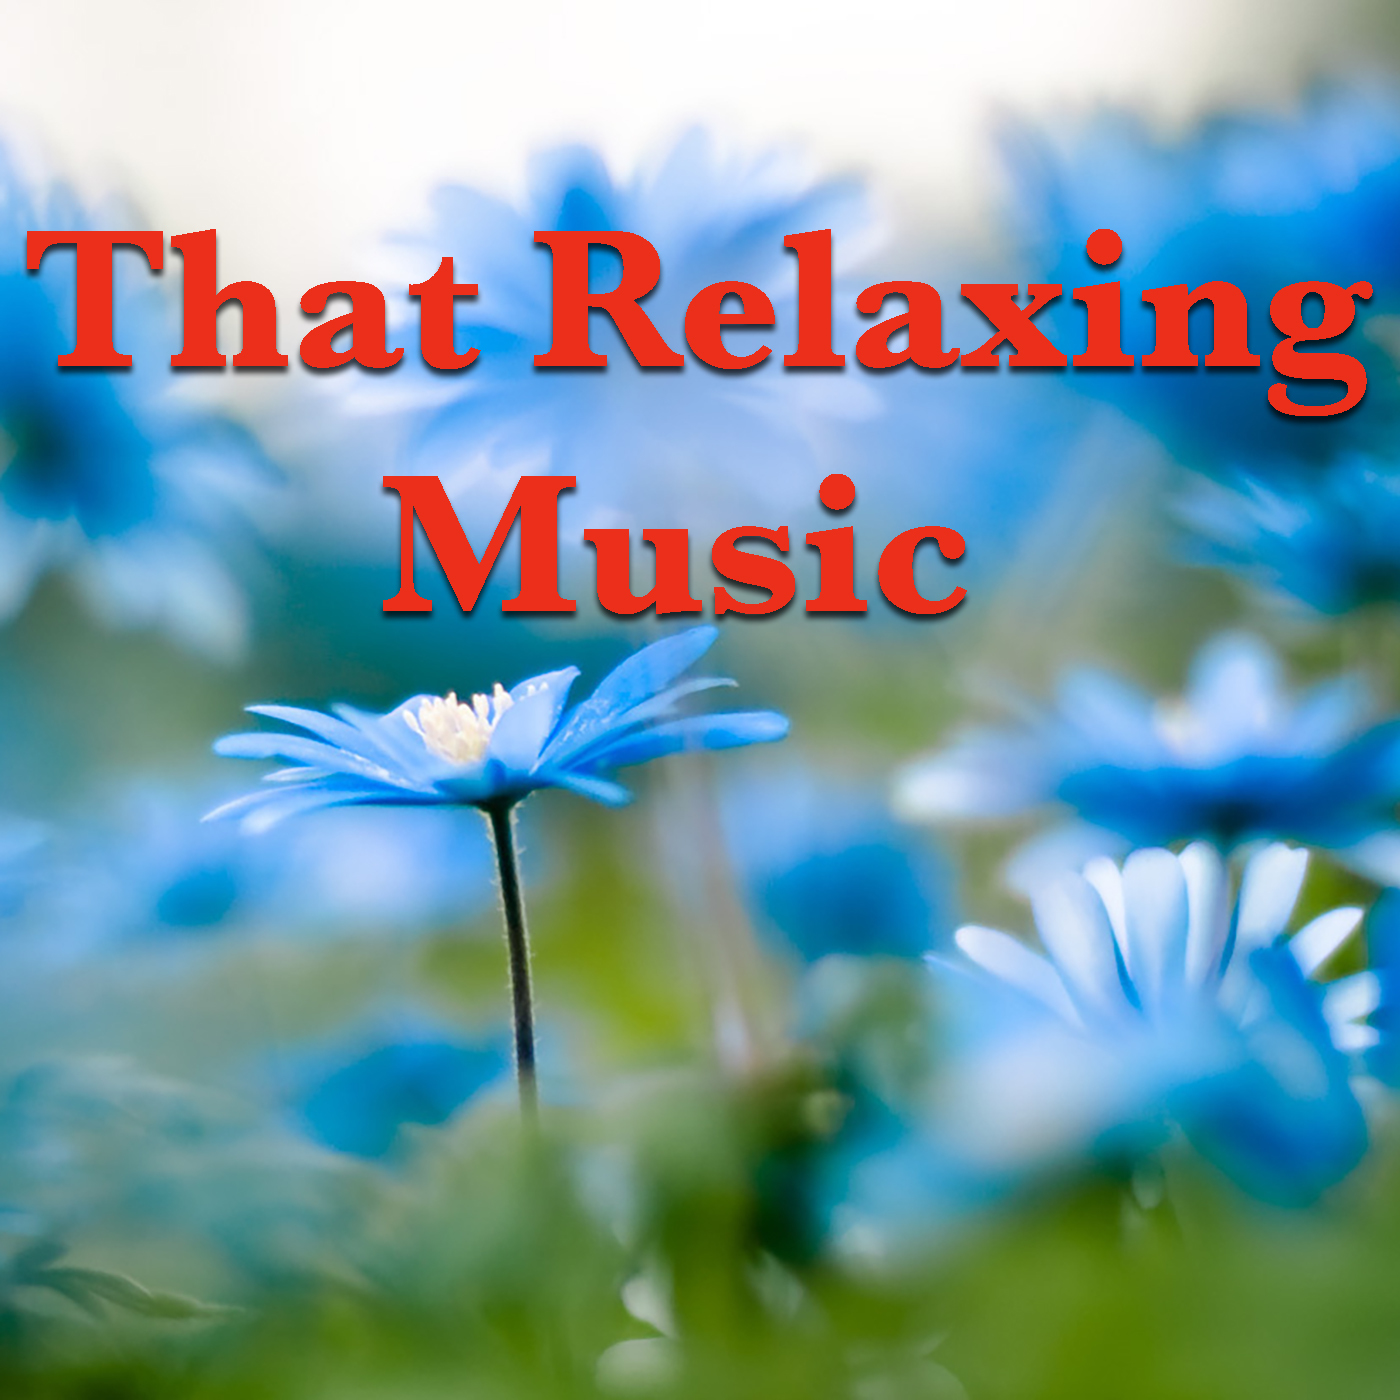 That Relaxing Music